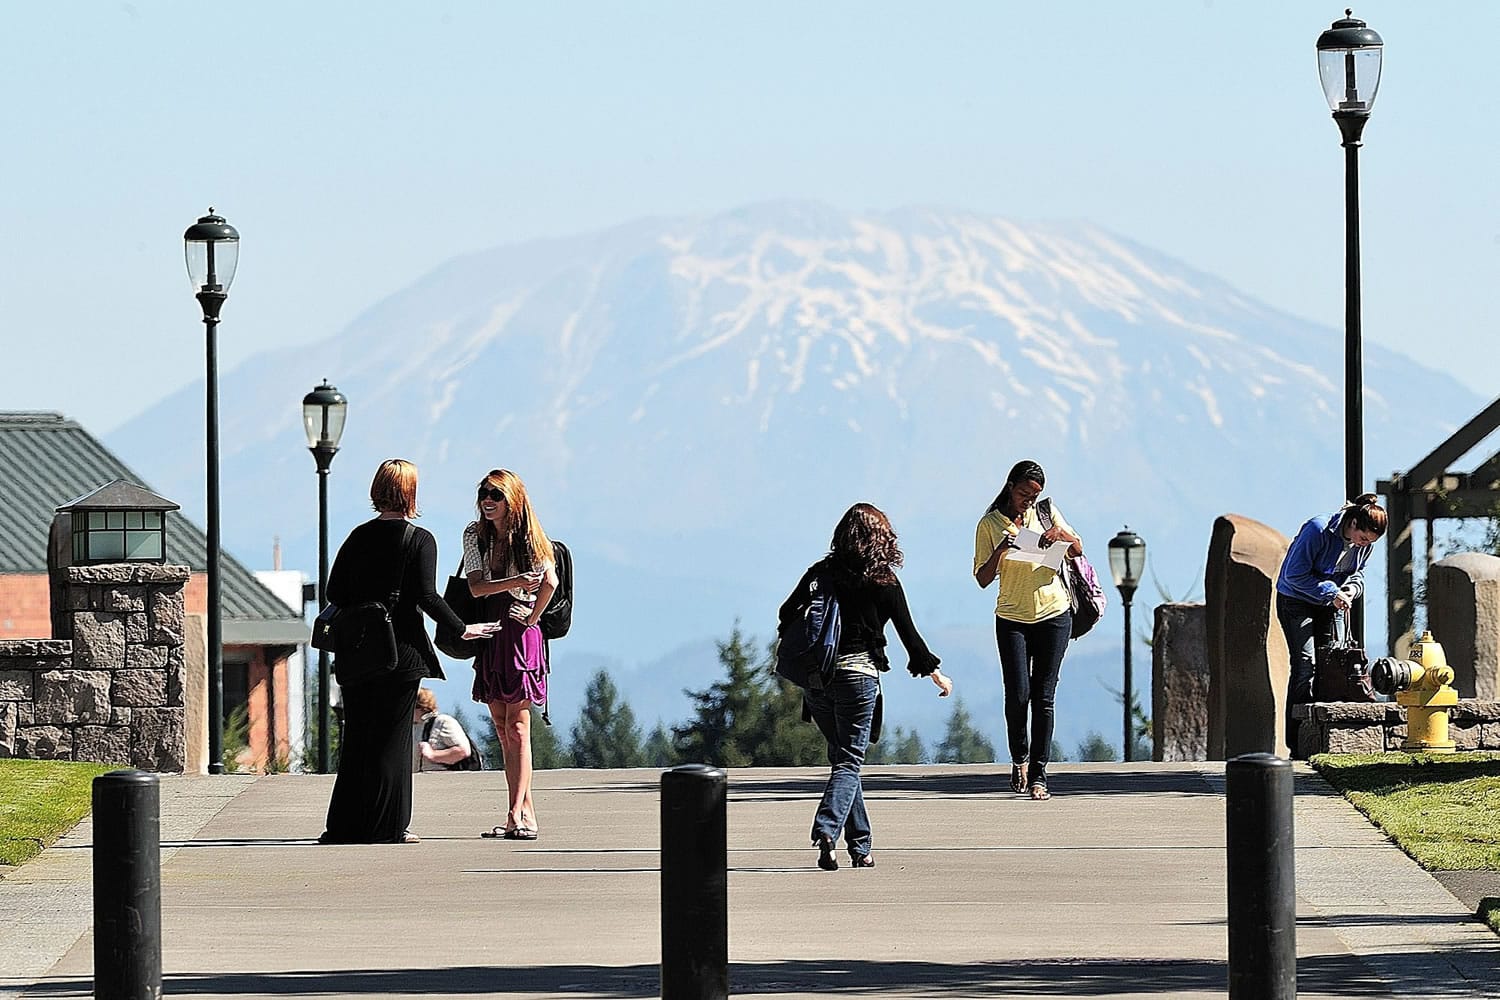 Latest state budget news may force university branch campuses, including WSUV, to play defense.